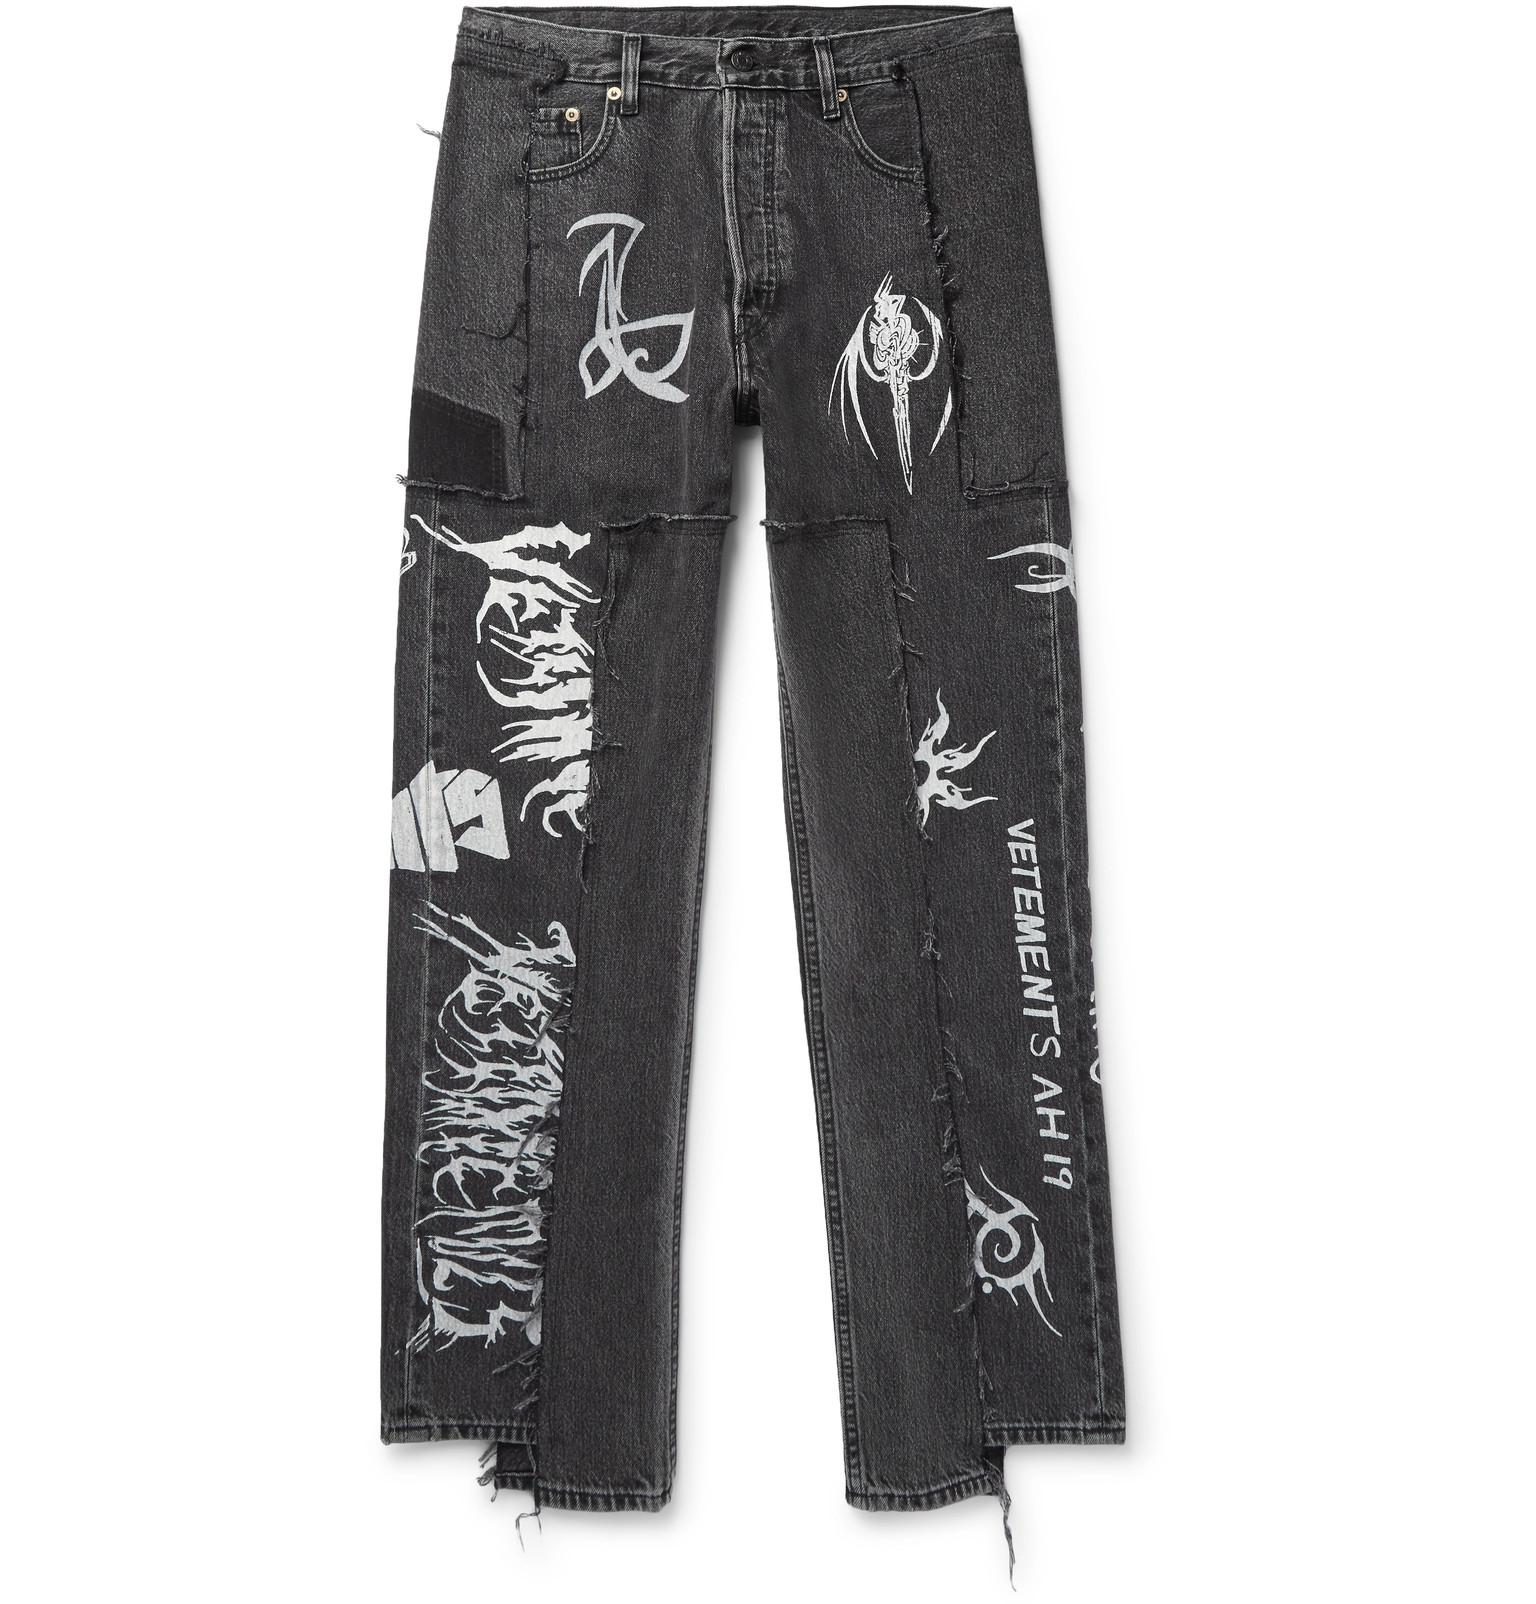 Levi's Printed Panelled Denim Jeans in 